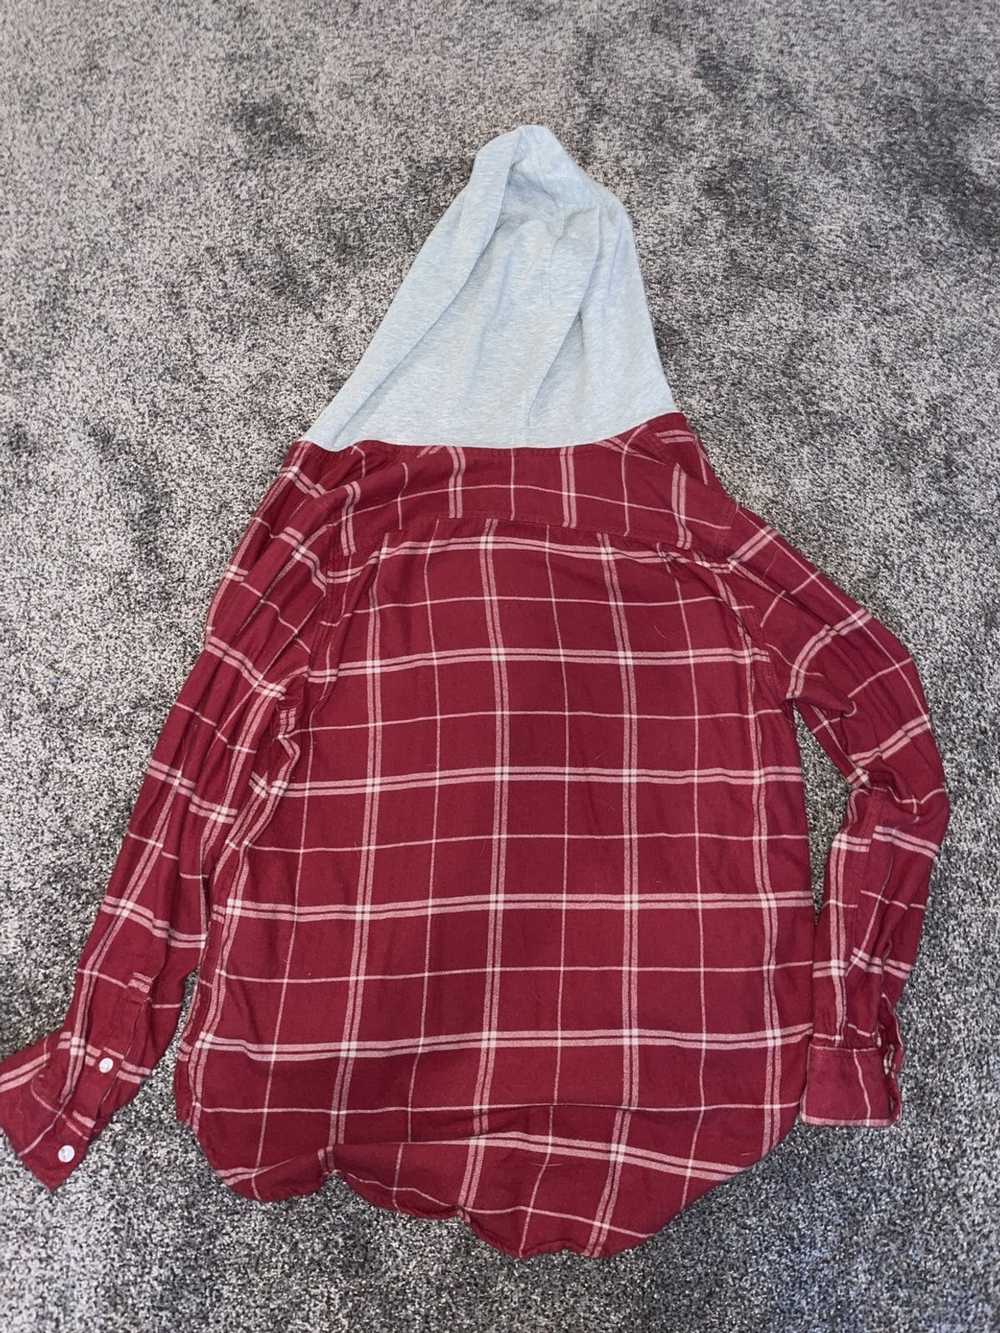 Pacsun Flannel Hoodie Red - image 2